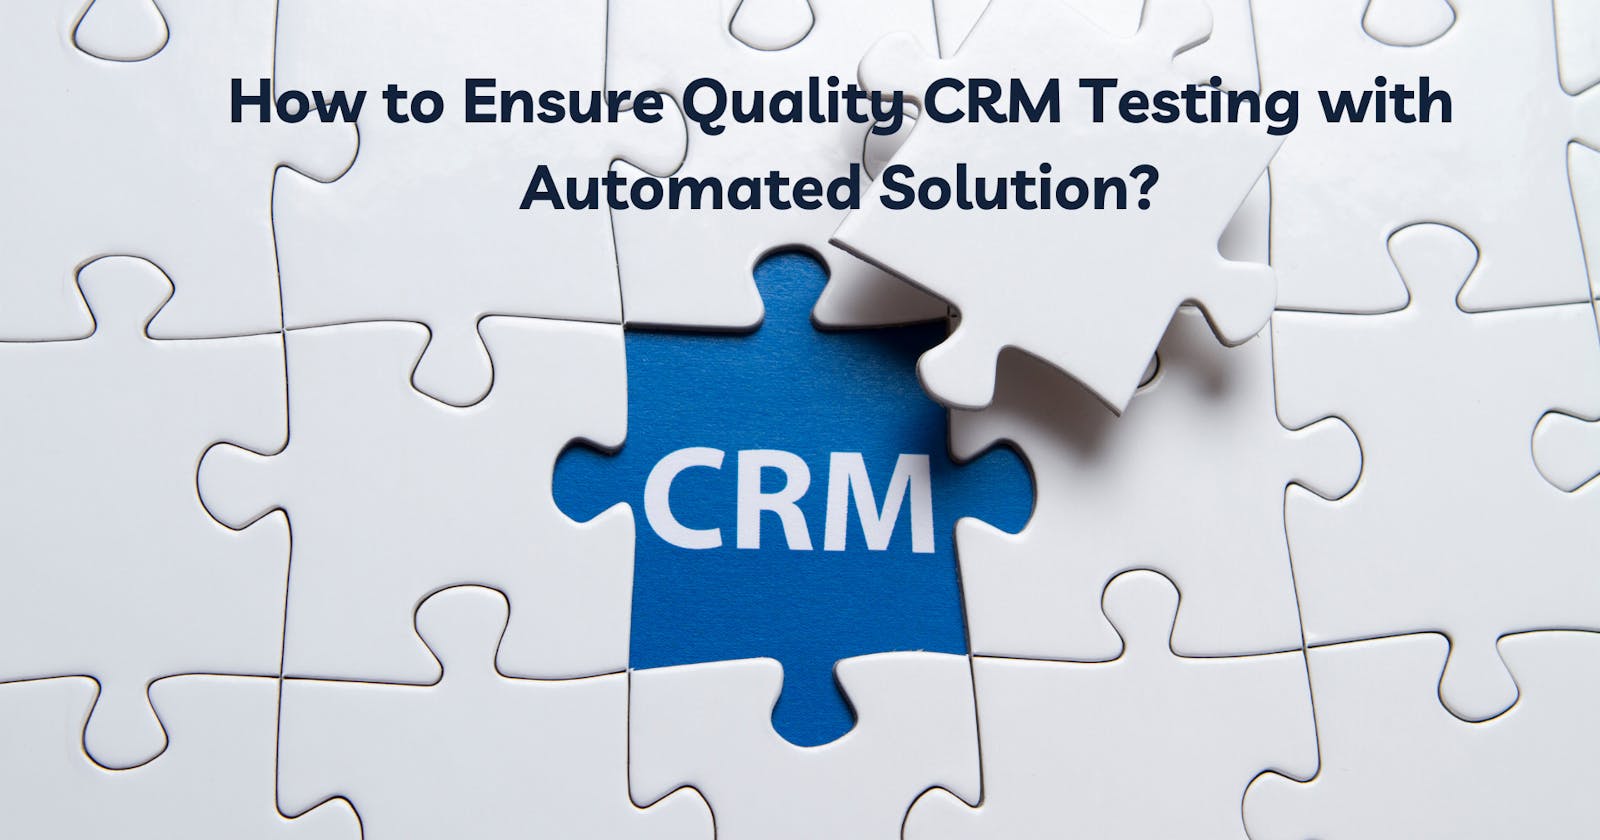 How to Ensure Quality CRM Testing with Automated Solution?